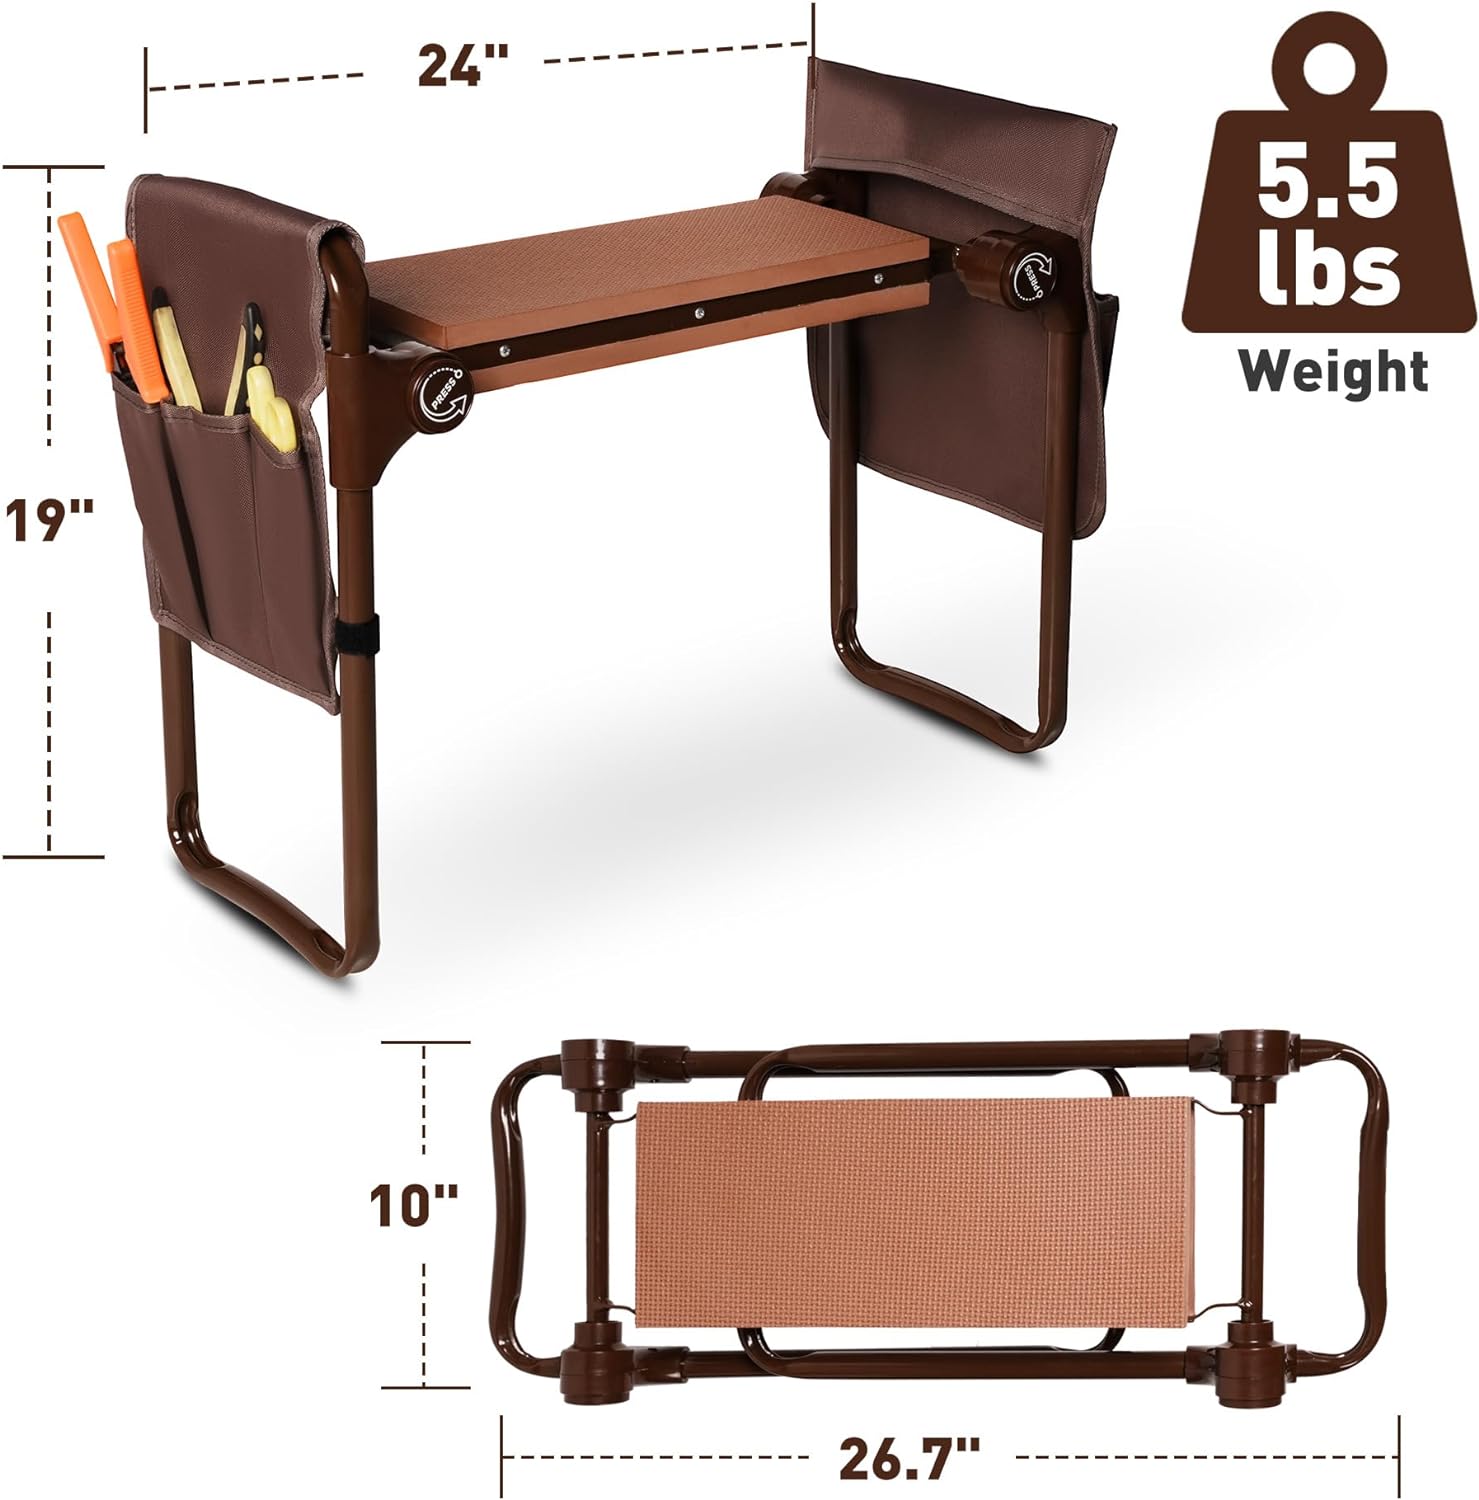 Garden Kneeler and Seat Bench, Heavy Duty Lightweight Garden Stool with 2 Tool Pouches